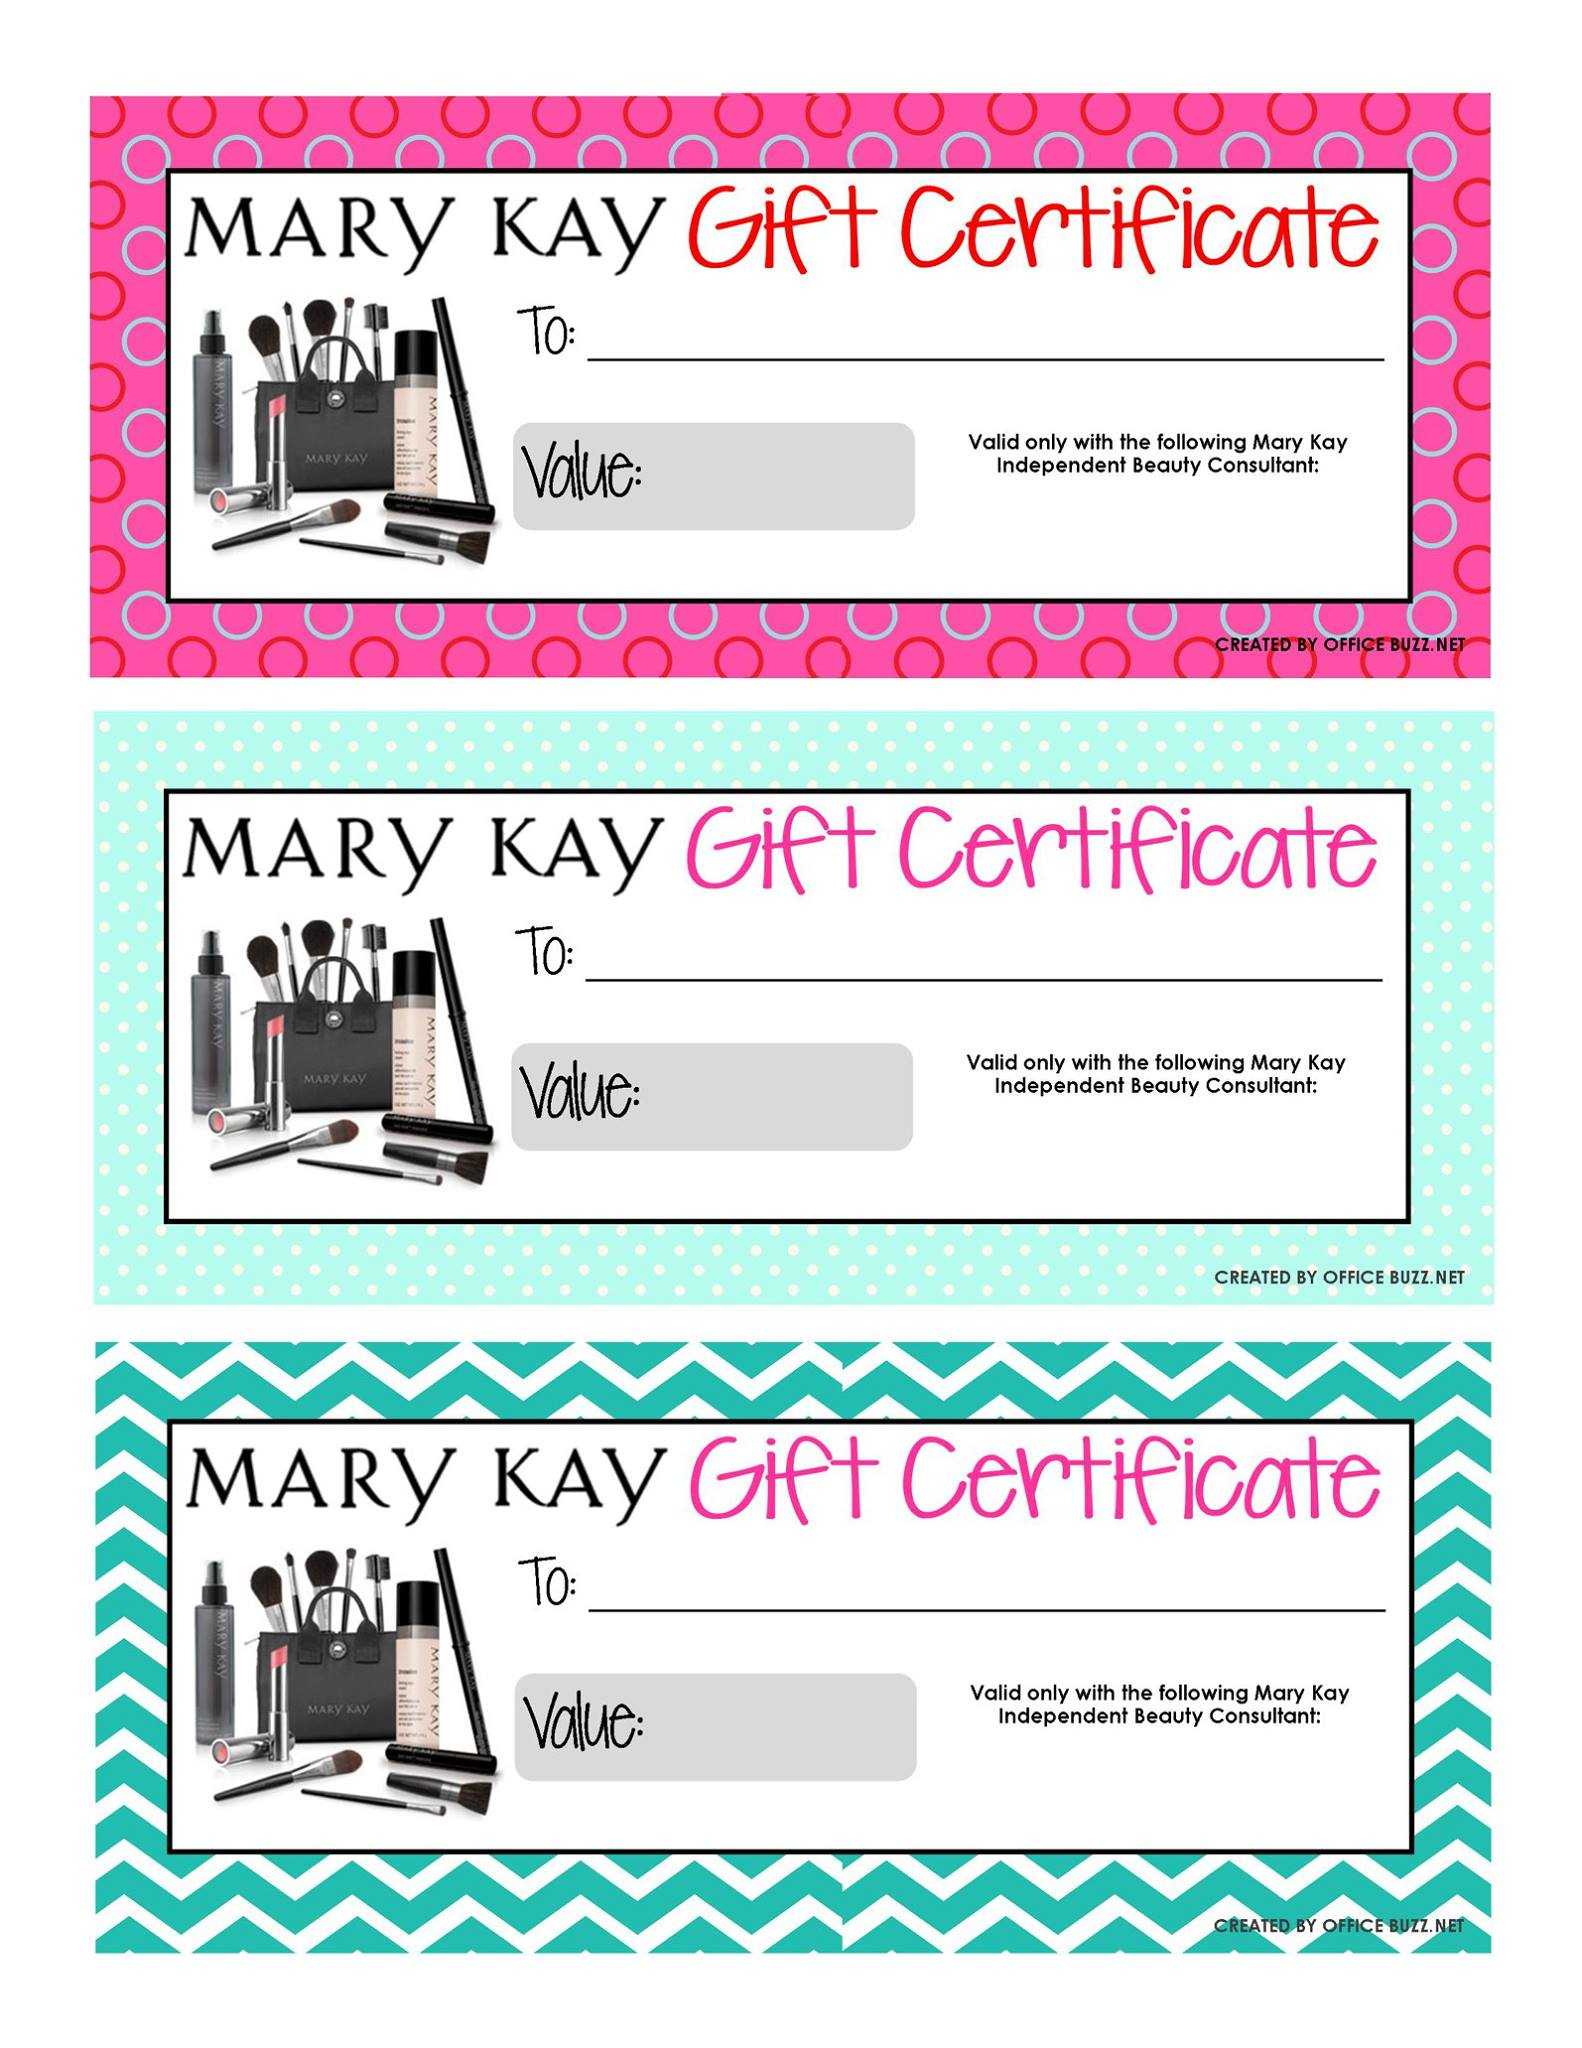 uk-mary-kay-gift-certificates-for-mary-kay-gift-certificate-template